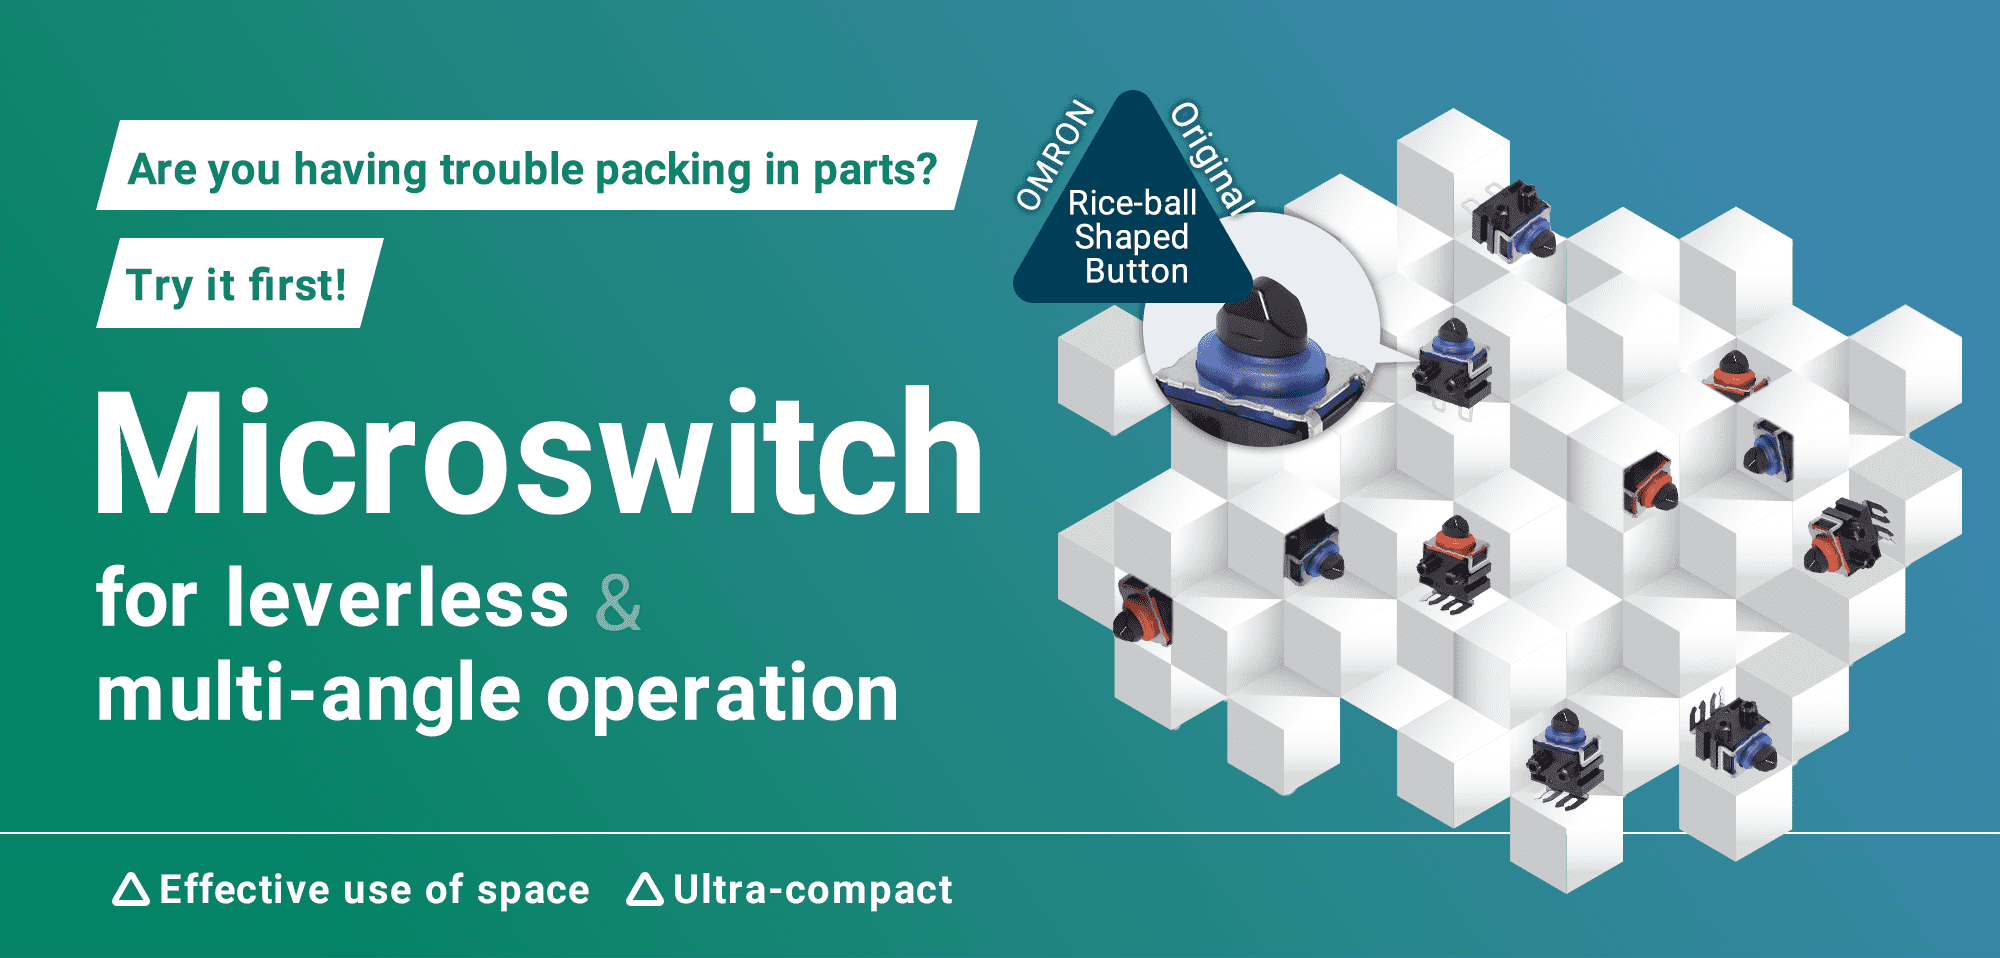 Are you having trouble packing in parts? Try it first! Microswitch for leverless & multi-angle operation(Effective use of space, Ultra-compact)